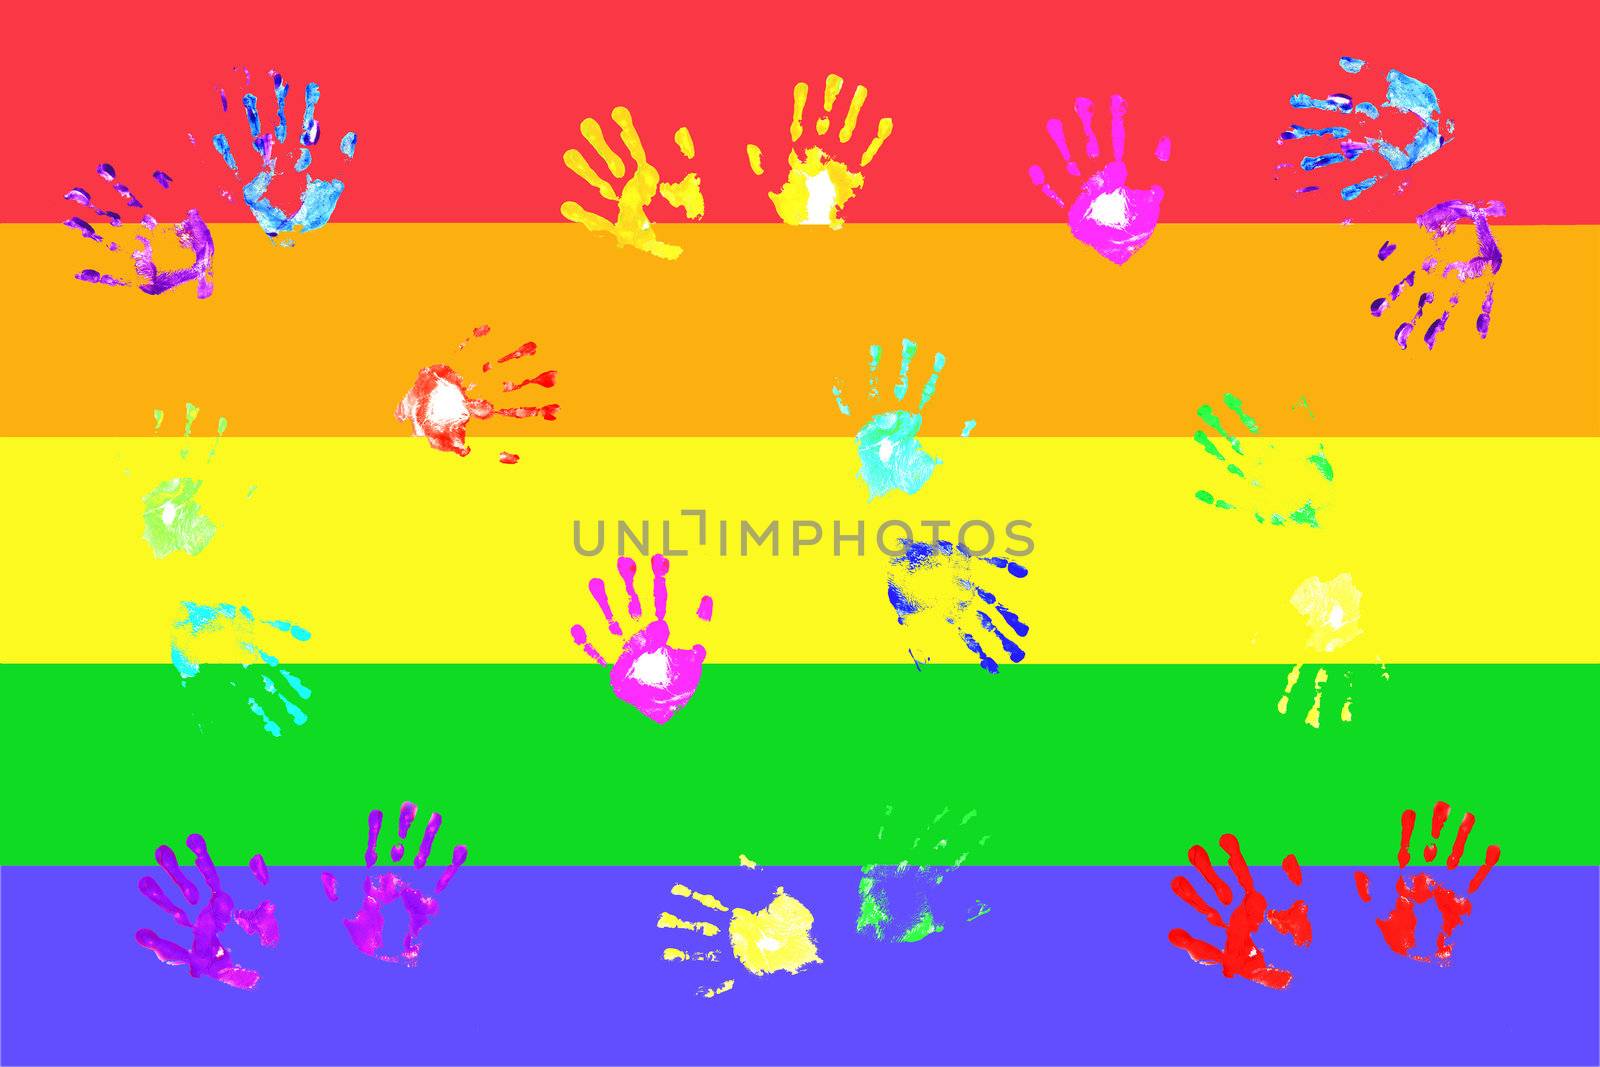 Actual handprints made by children on bold colorful background
;